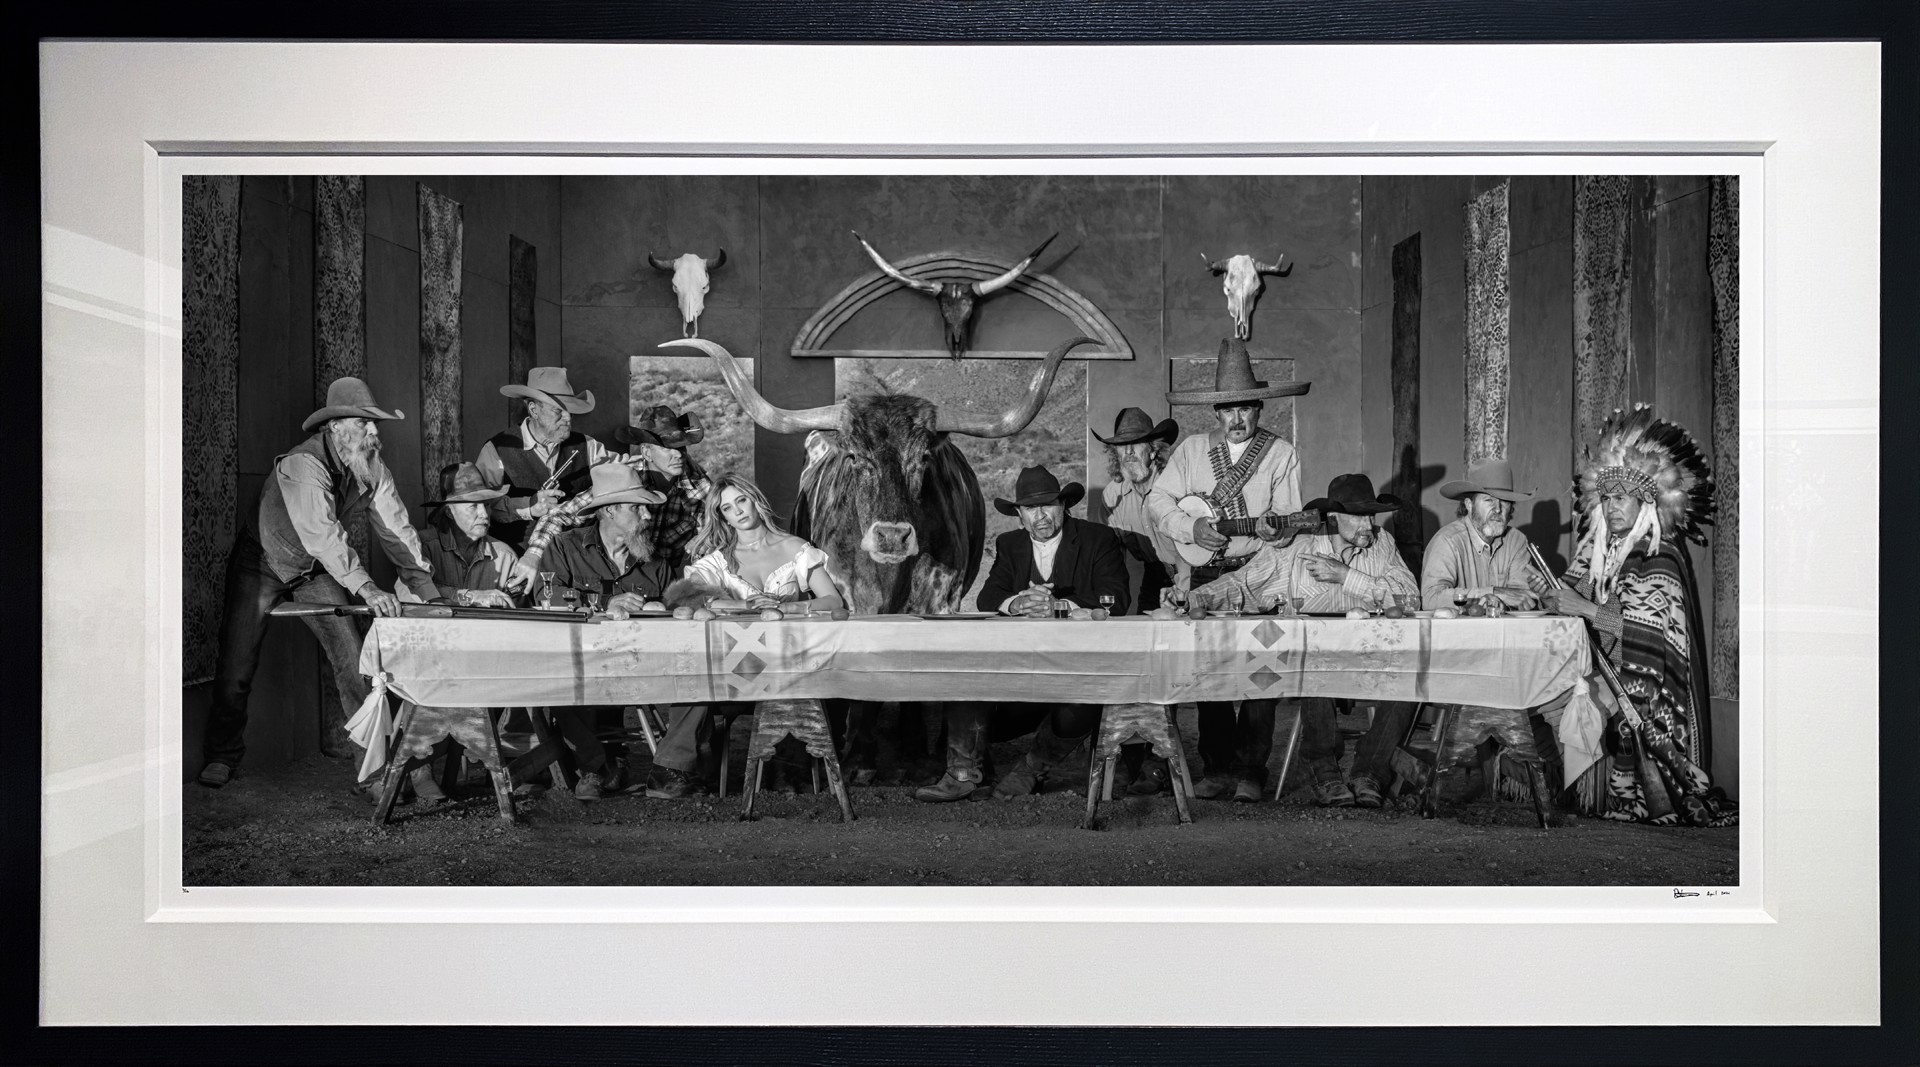 The Last Supper in Texas by David Yarrow